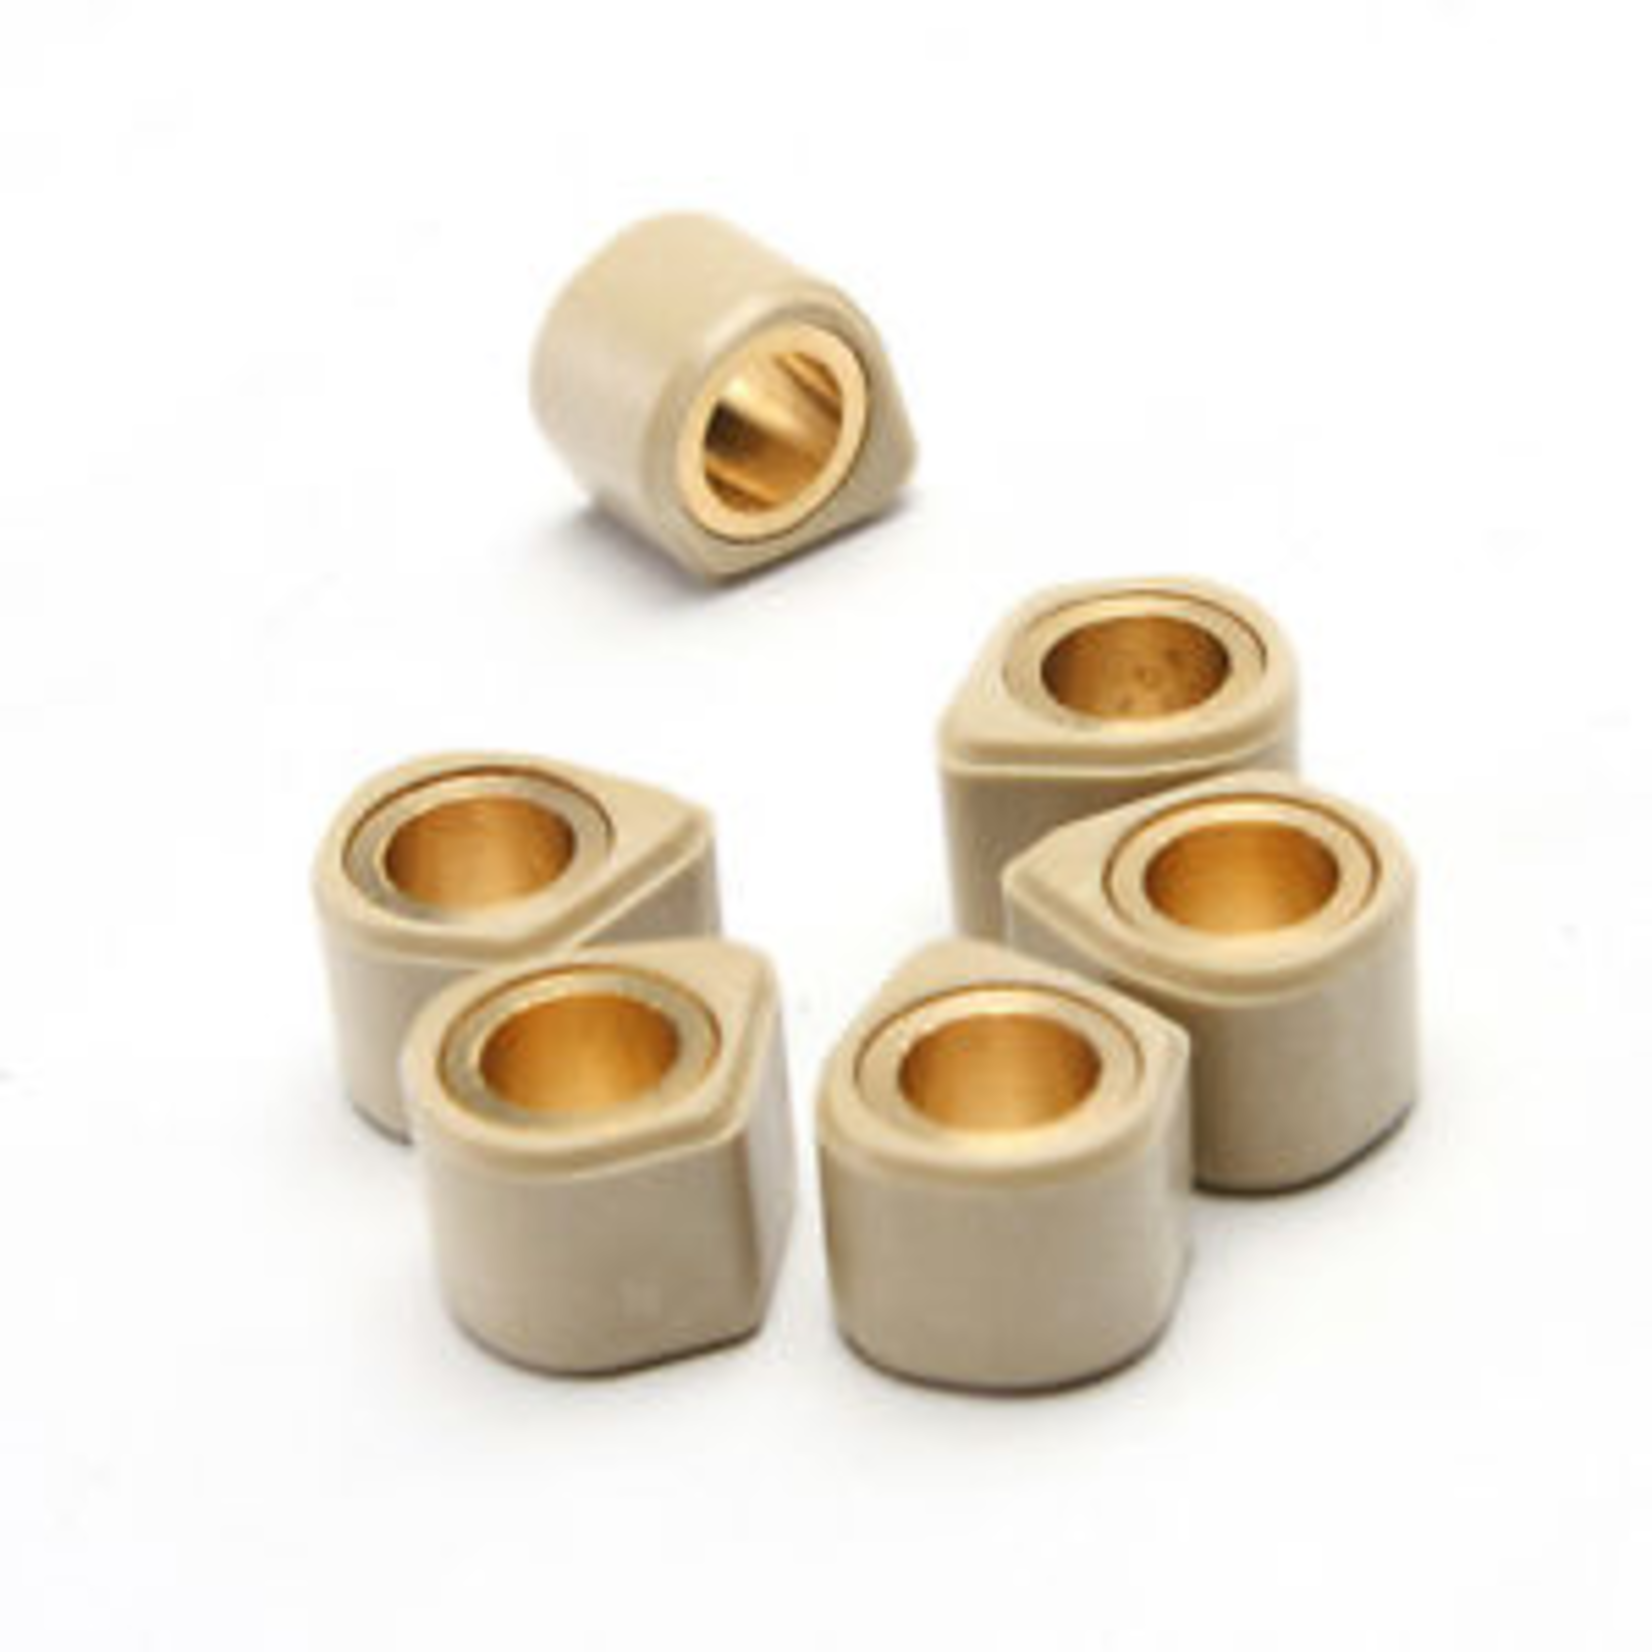 Parts Rollers, Dr. Pulley 25x17 400/500cc 19GR